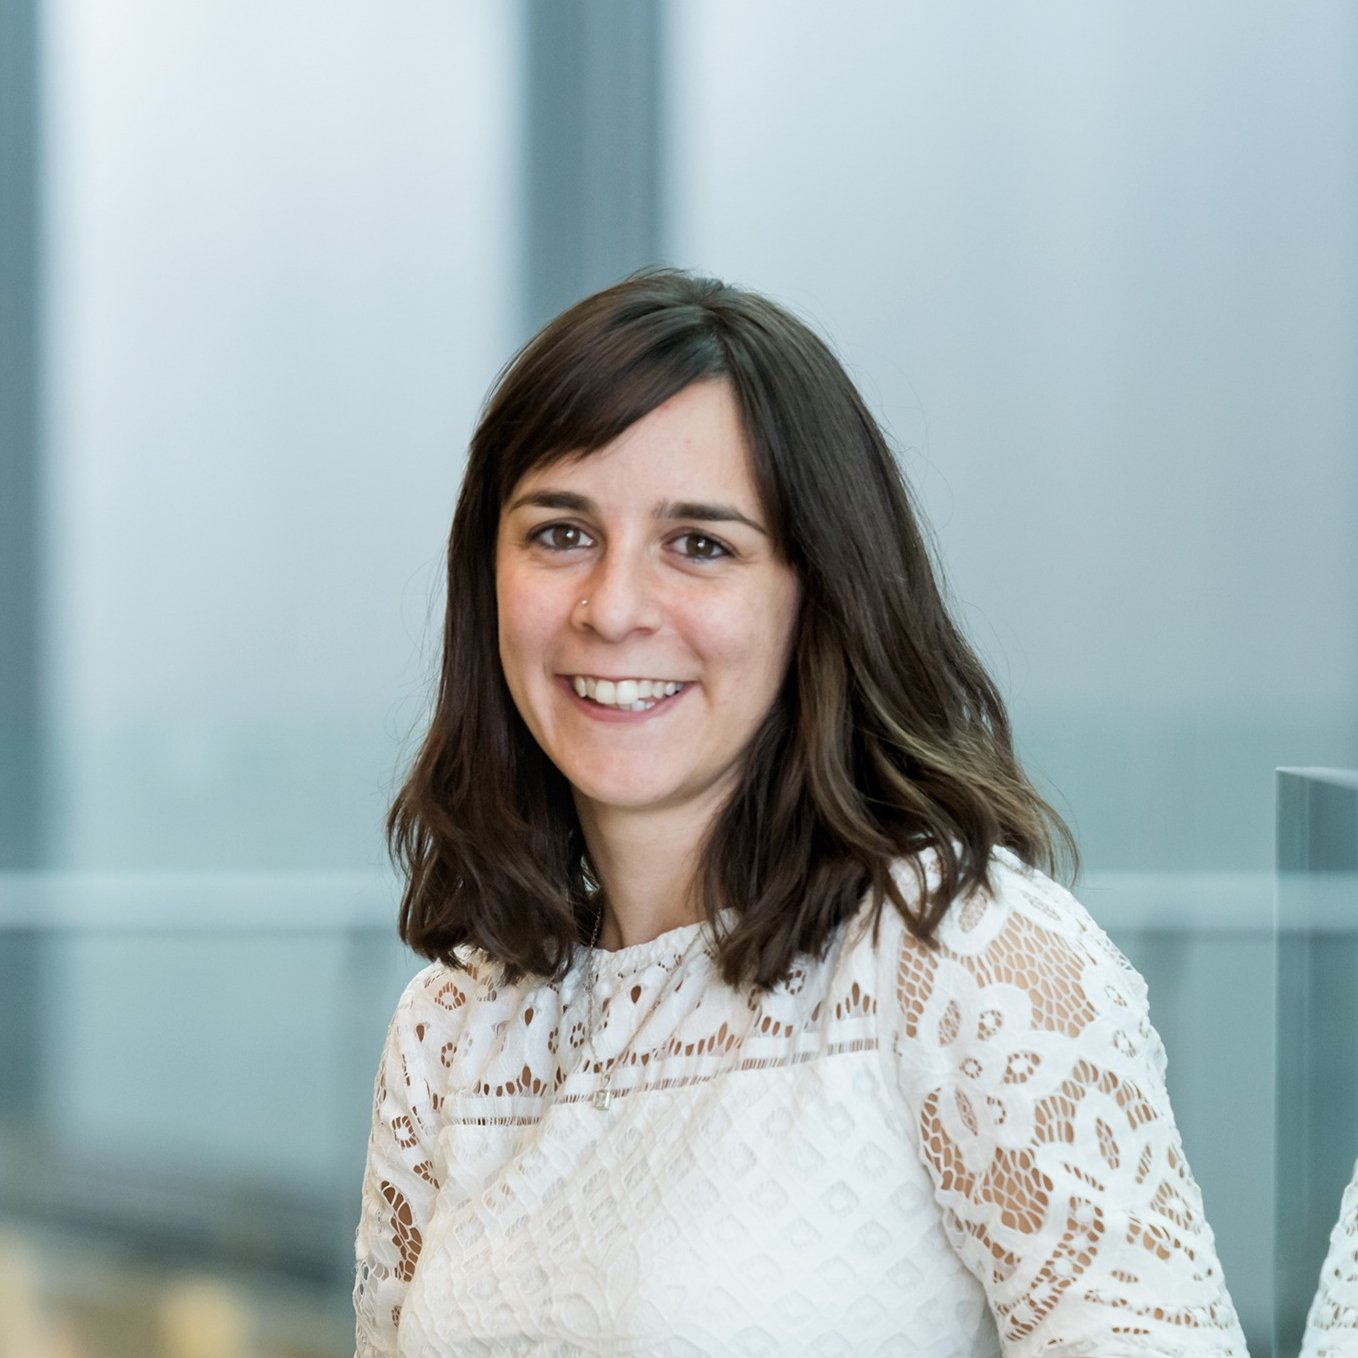 Neuronal circuits and behaviour laboratory, group Leader @theCrick. Proud 💁‍♀️🐶😺mama. @Flor_iacaruso@qoto.org